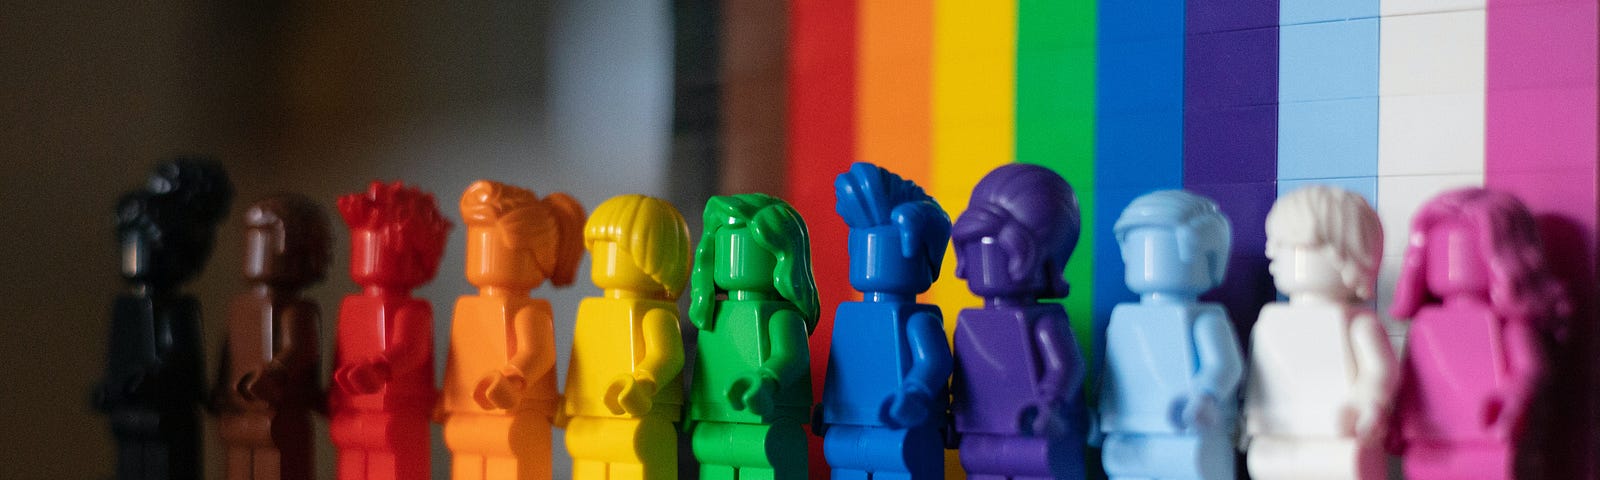 A series of differently coloured lego figurines arranged in the order of the rainbow flag with rainbow lego background